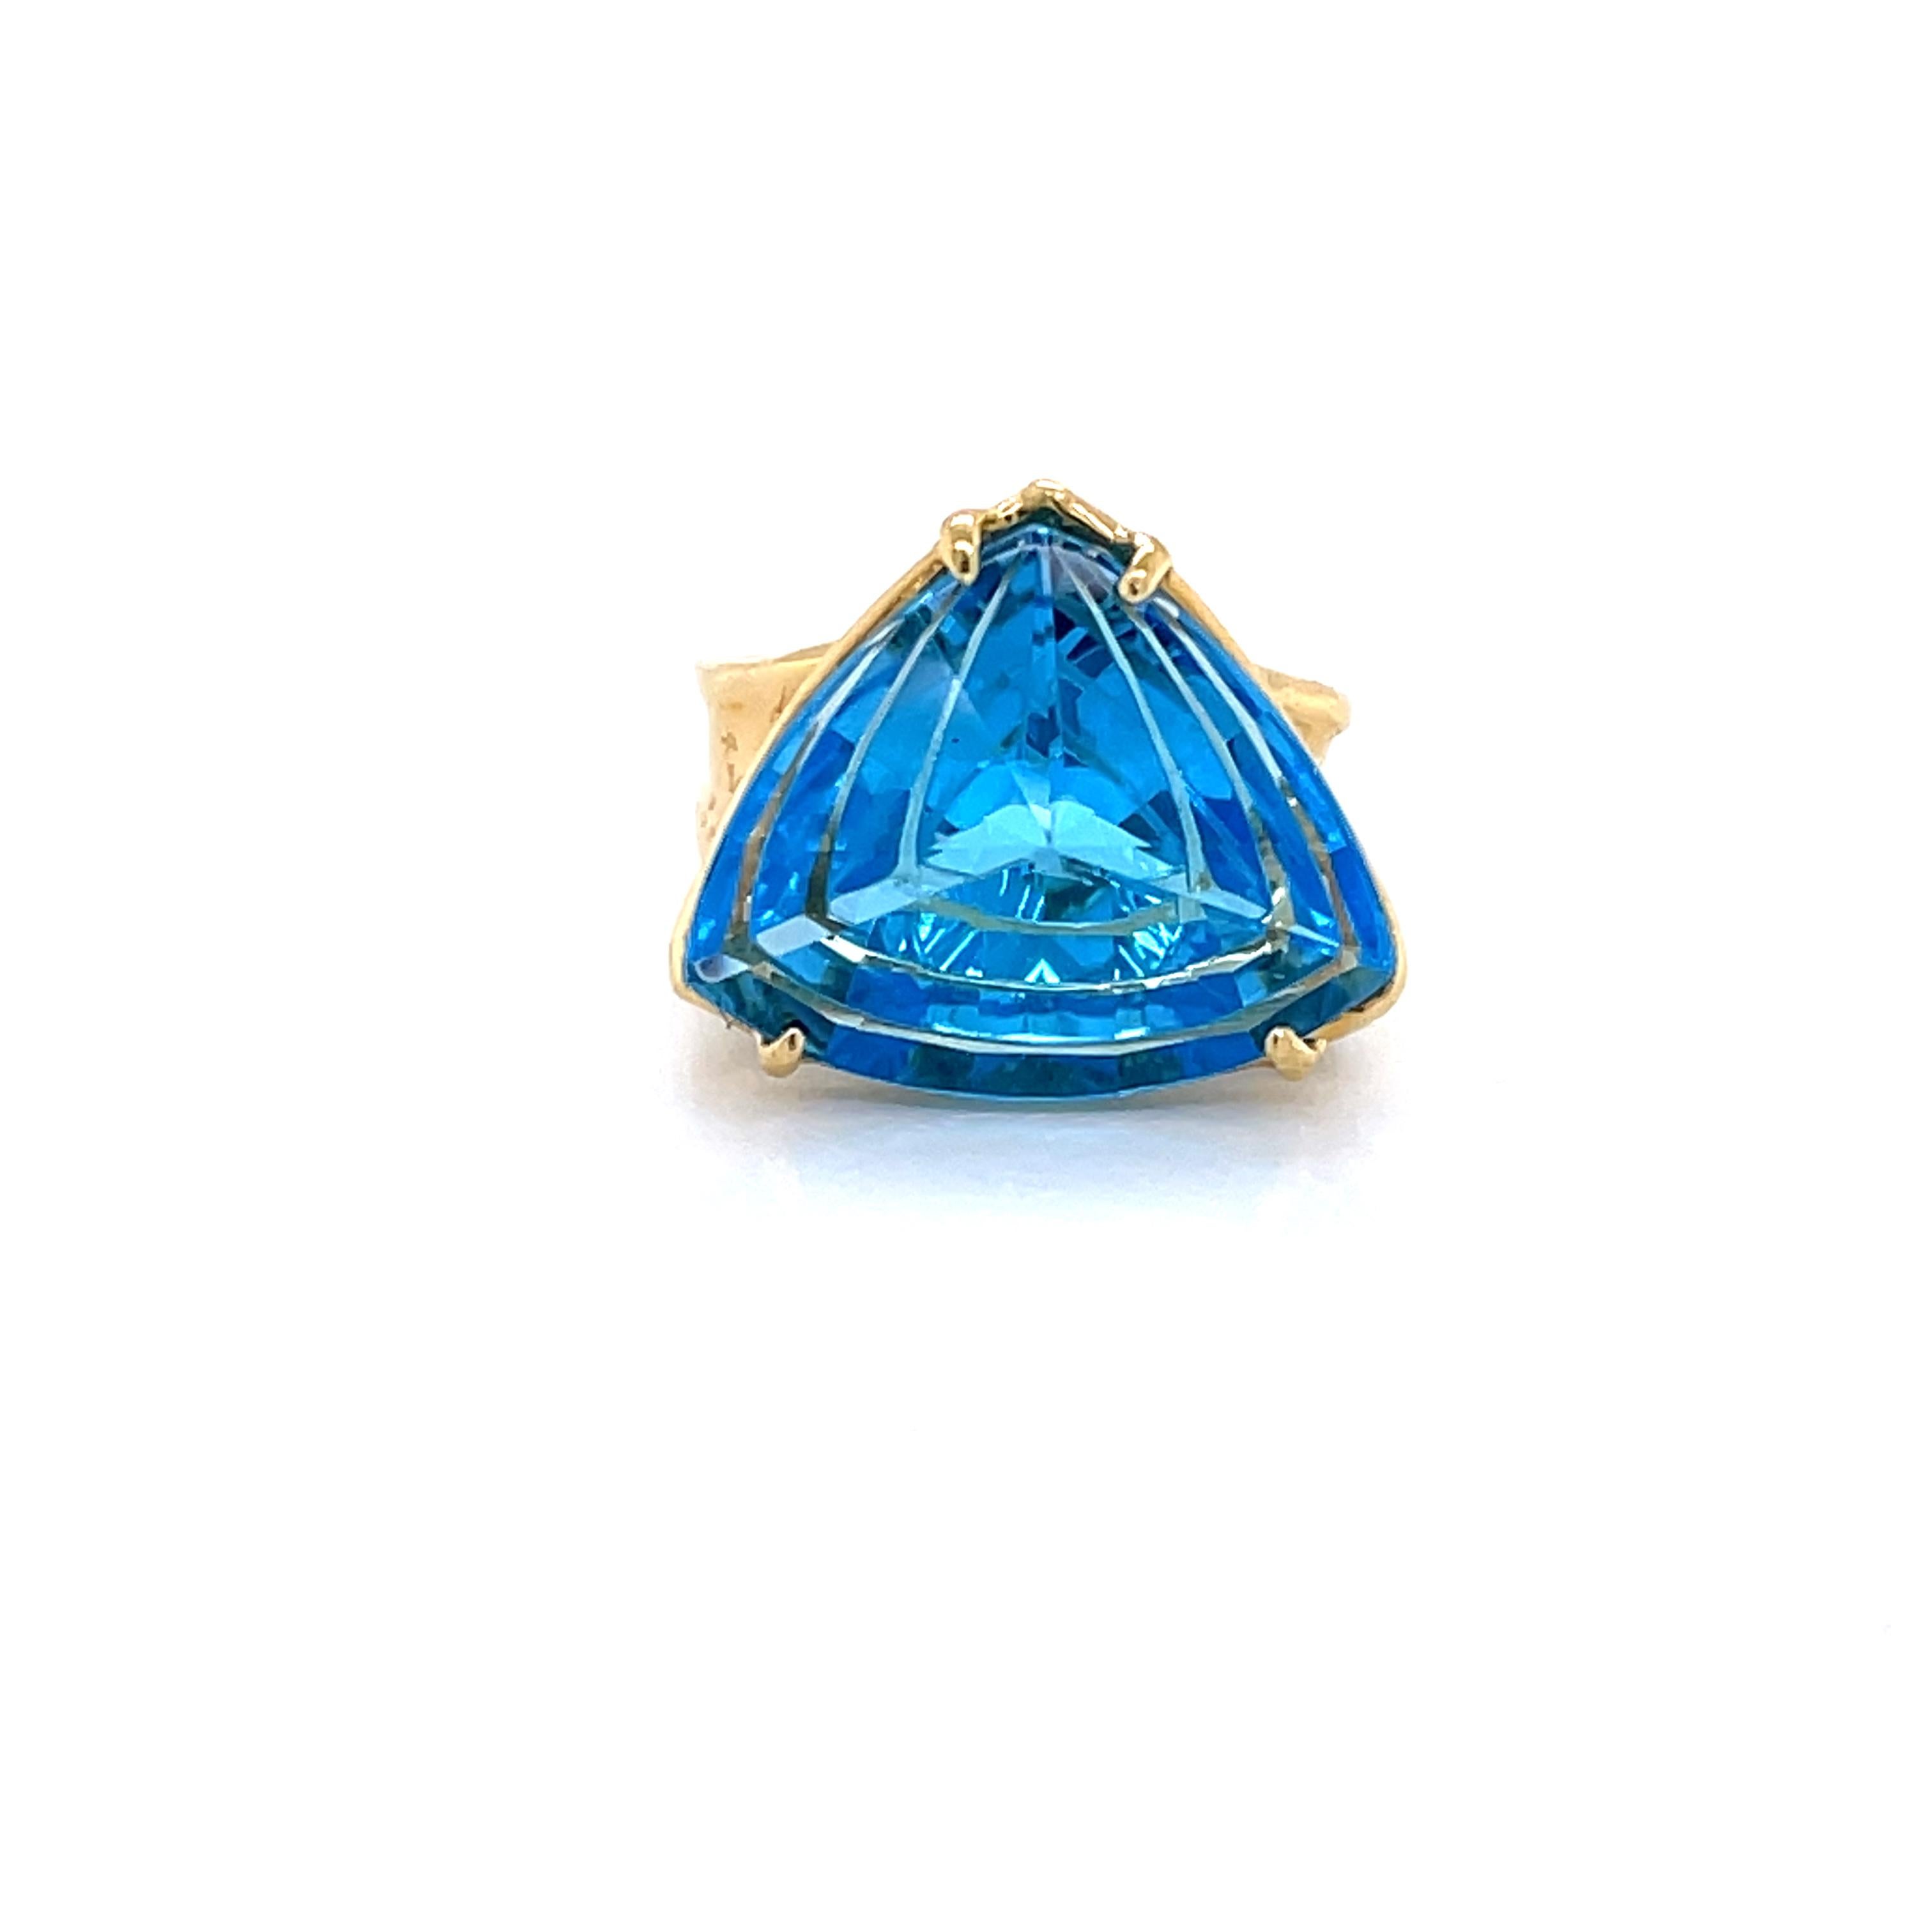 Show off this vivid blue fantasy cut trillion topaz, perfect for a pinky ring or ring finger. The unique shape of the stone is presented in a floating setting to appreciate it's depth of color. The ring is made with a graduated 3.8 -5.8mm flared 18